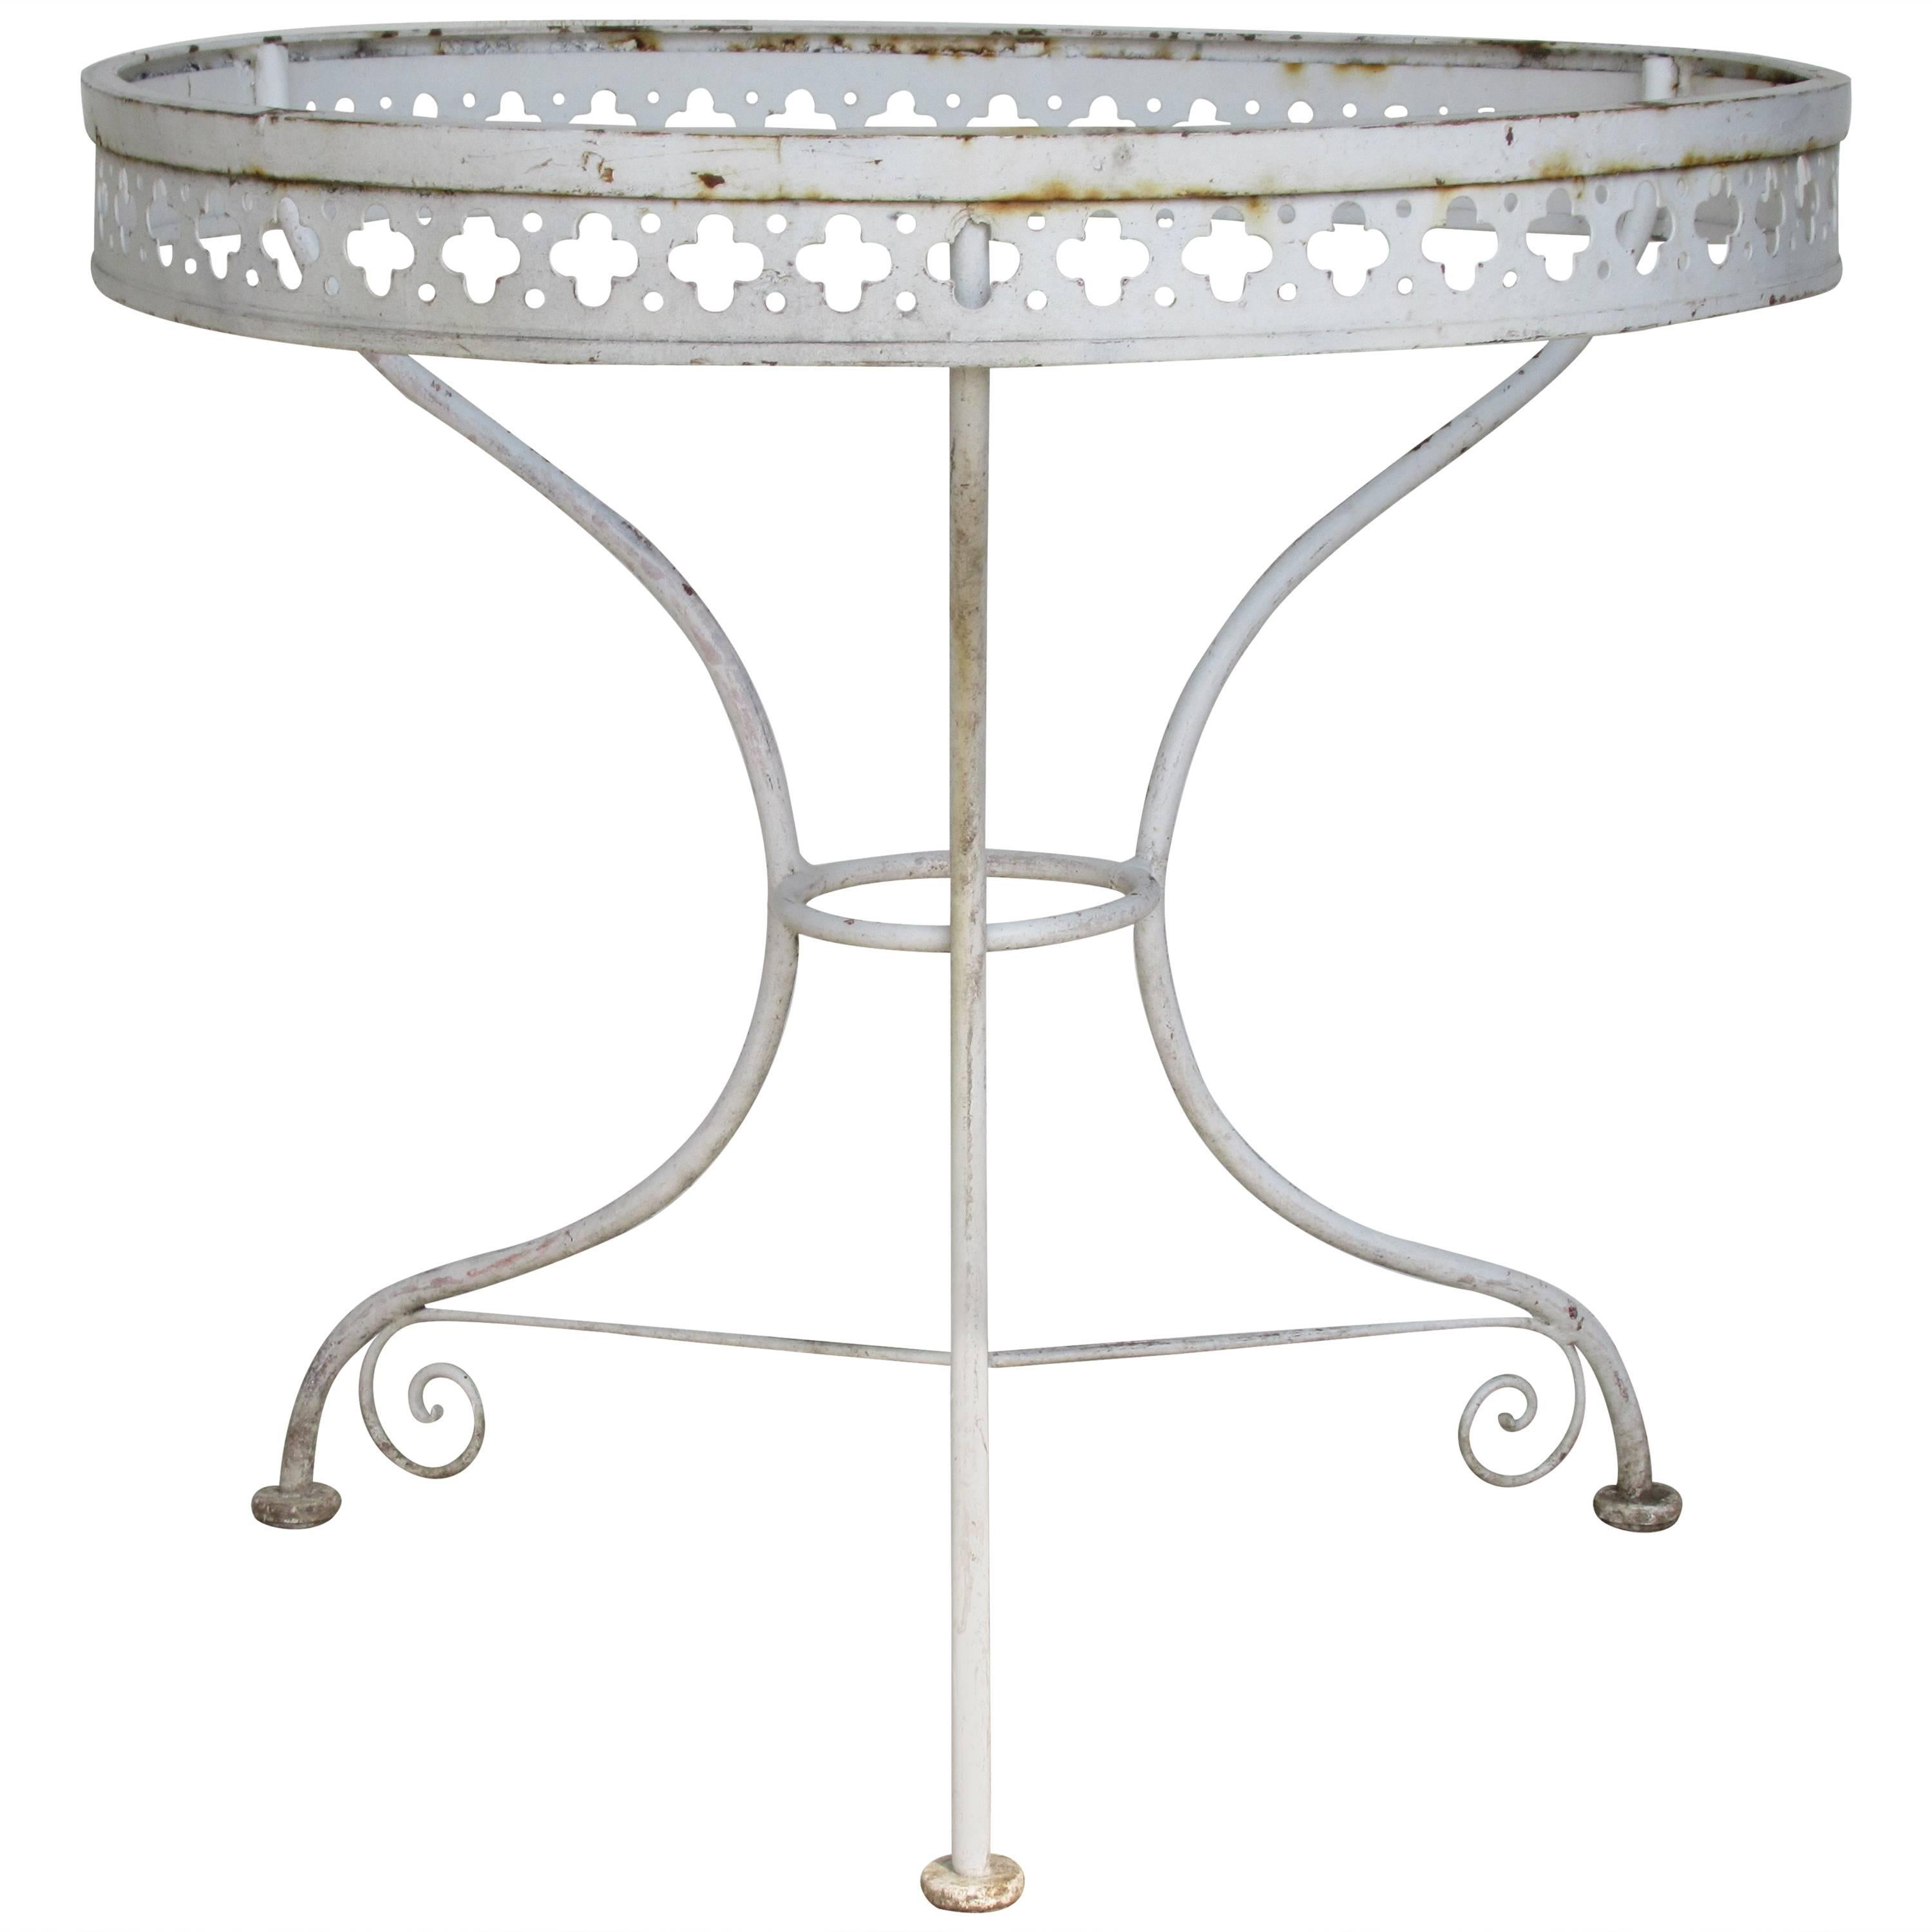 Gothic Modern Wrought Iron Table